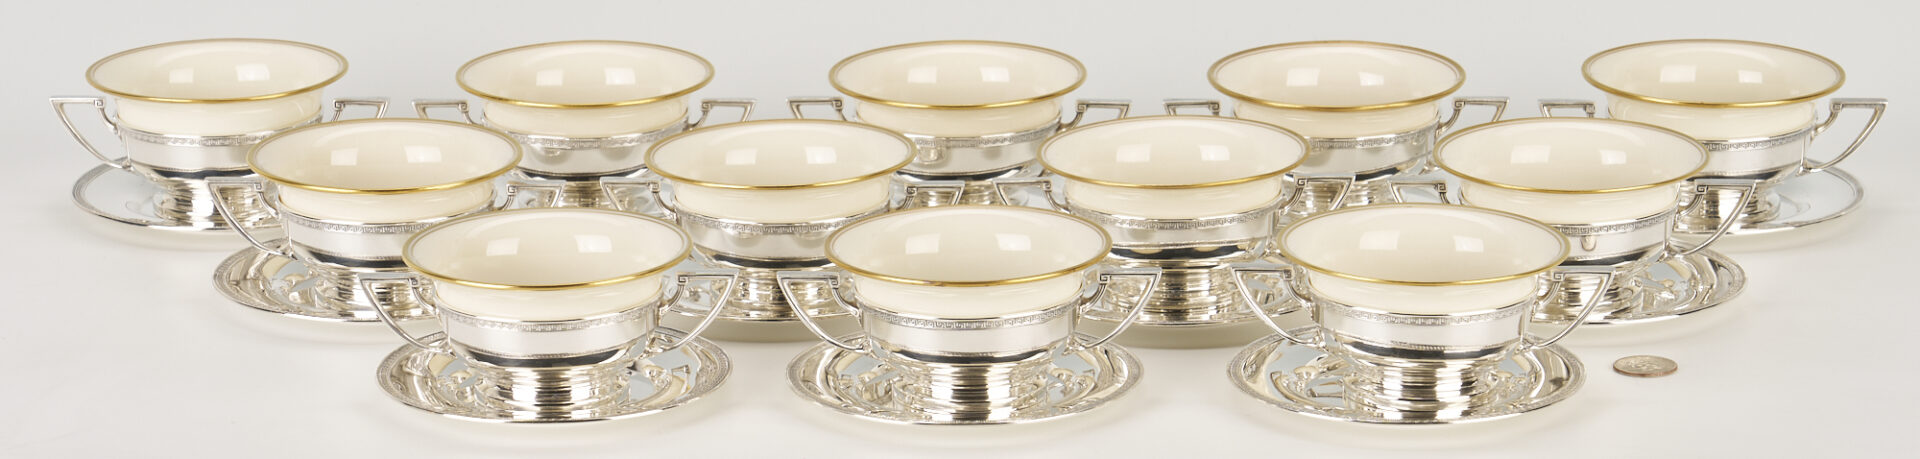 Lot 287: 12 Gorham Sterling Silver and Lenox Porcelain Soup Cups and Underplates